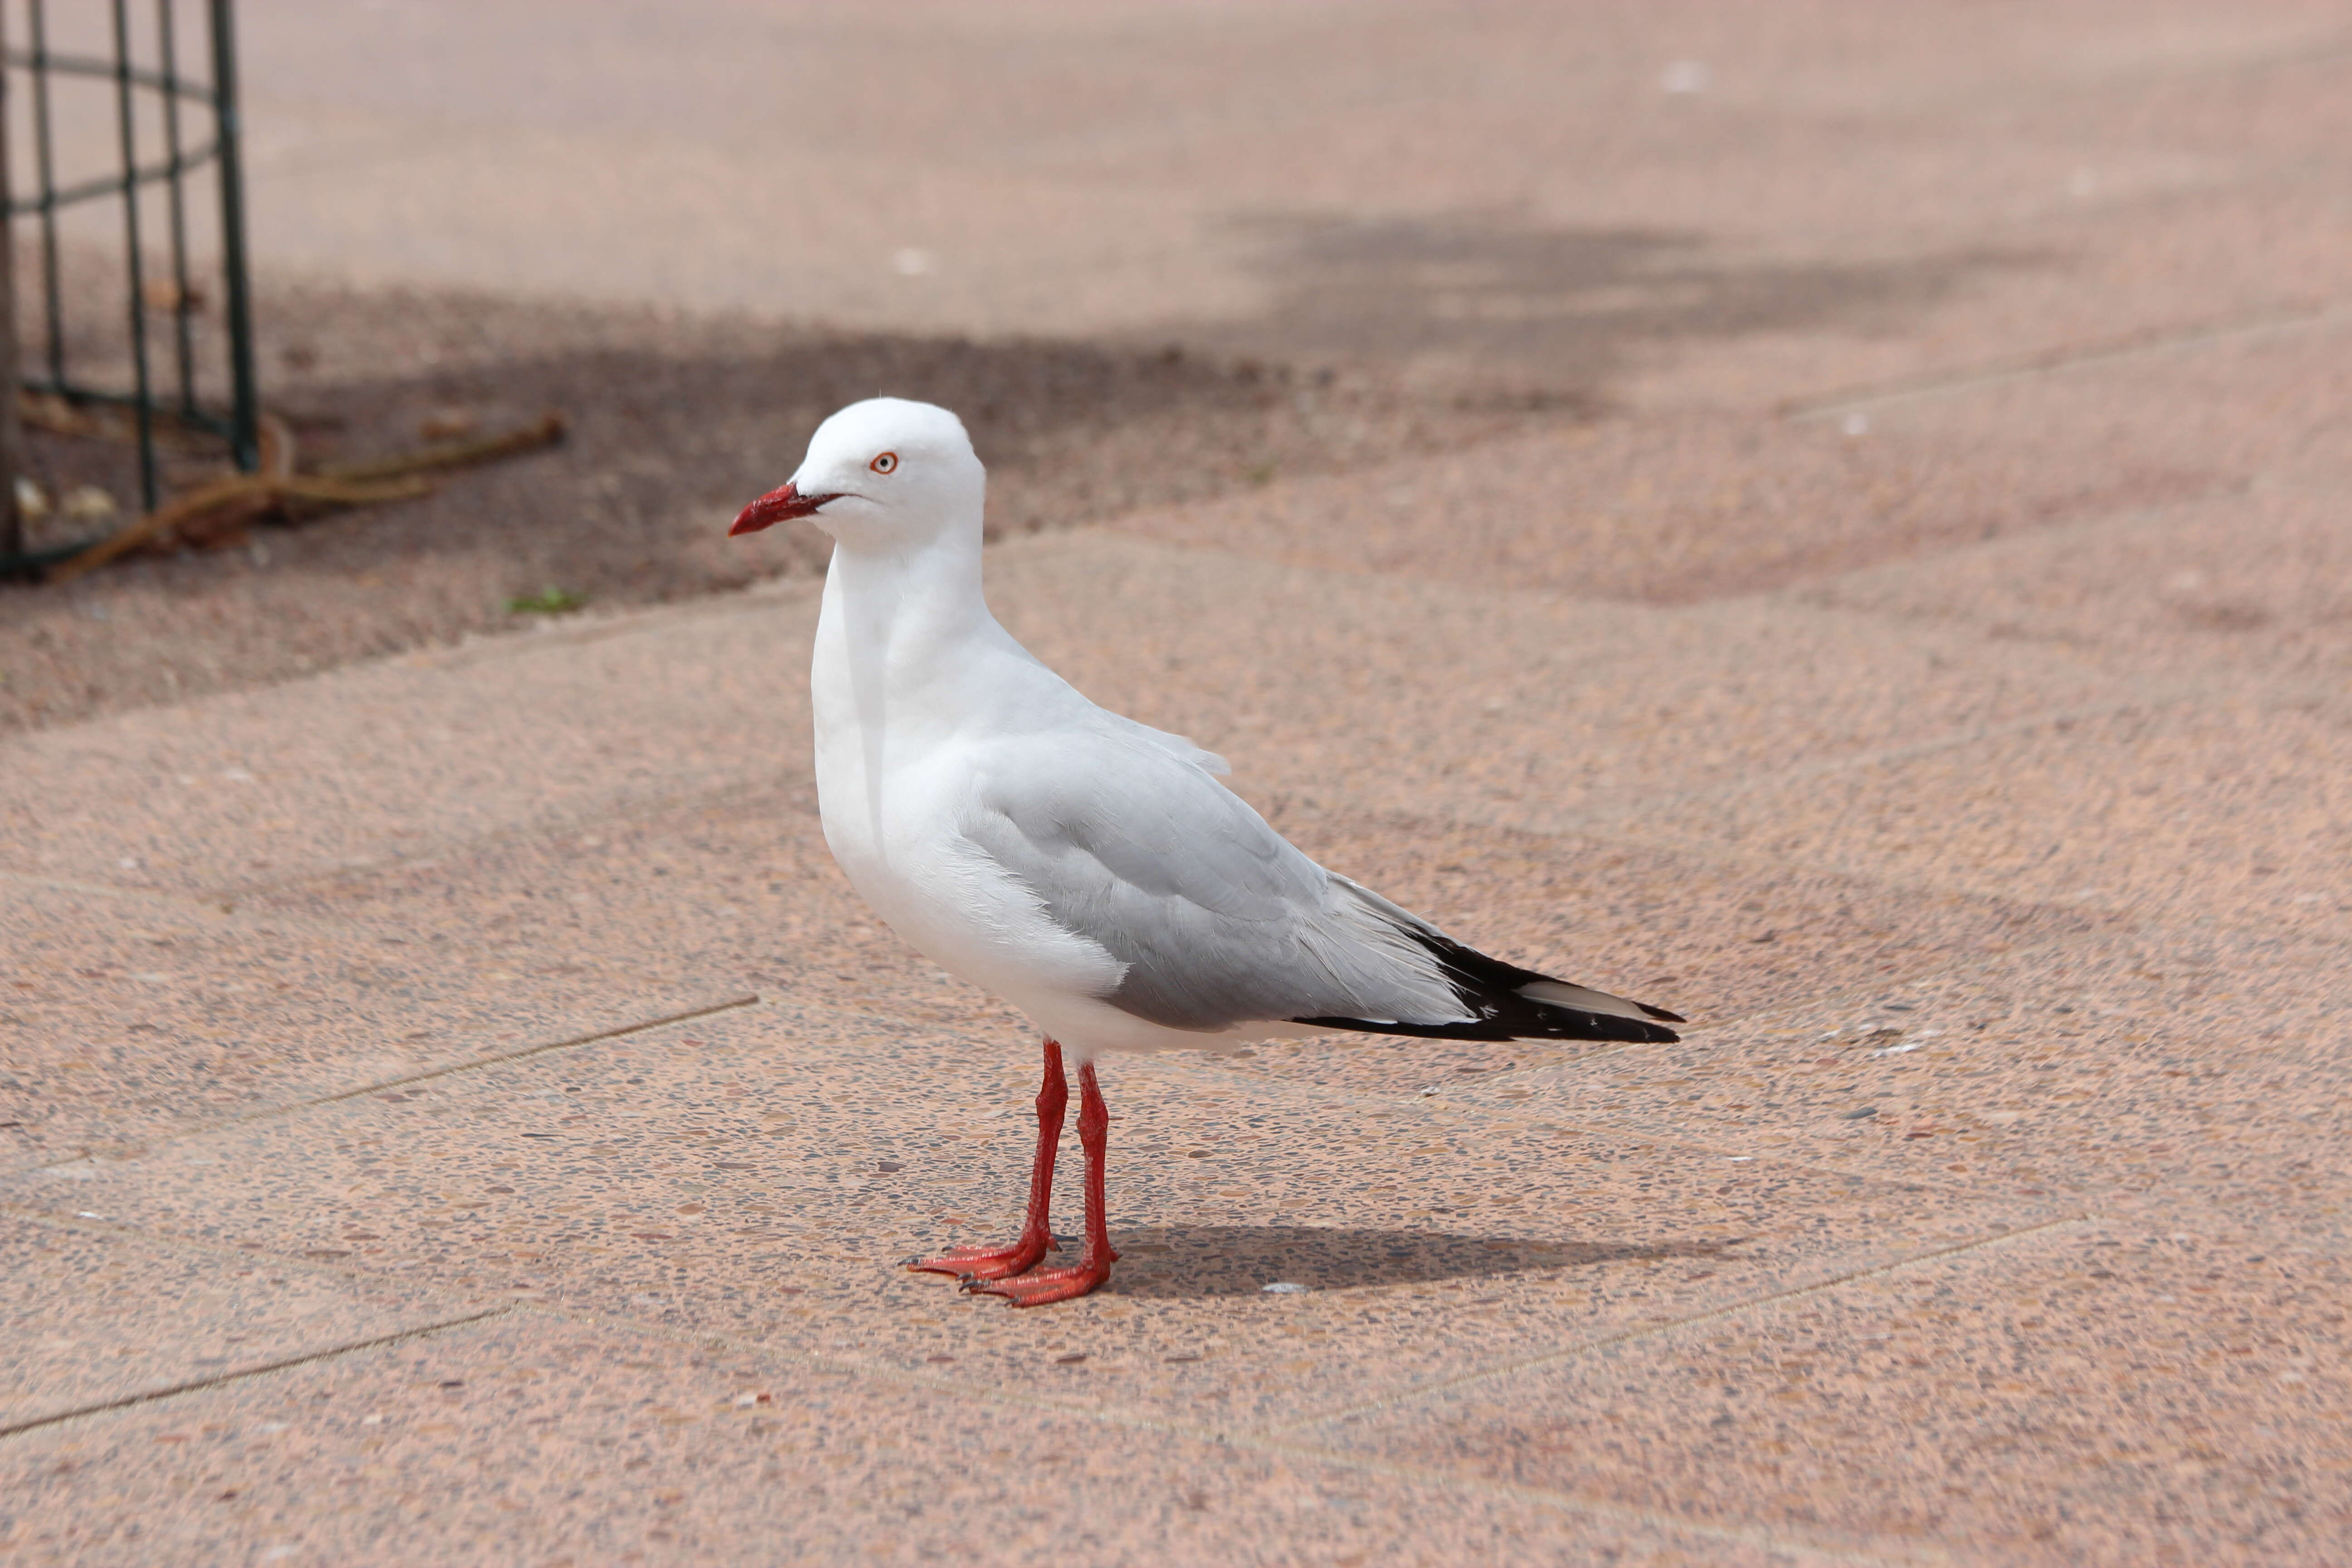 Image of Hooded gulls